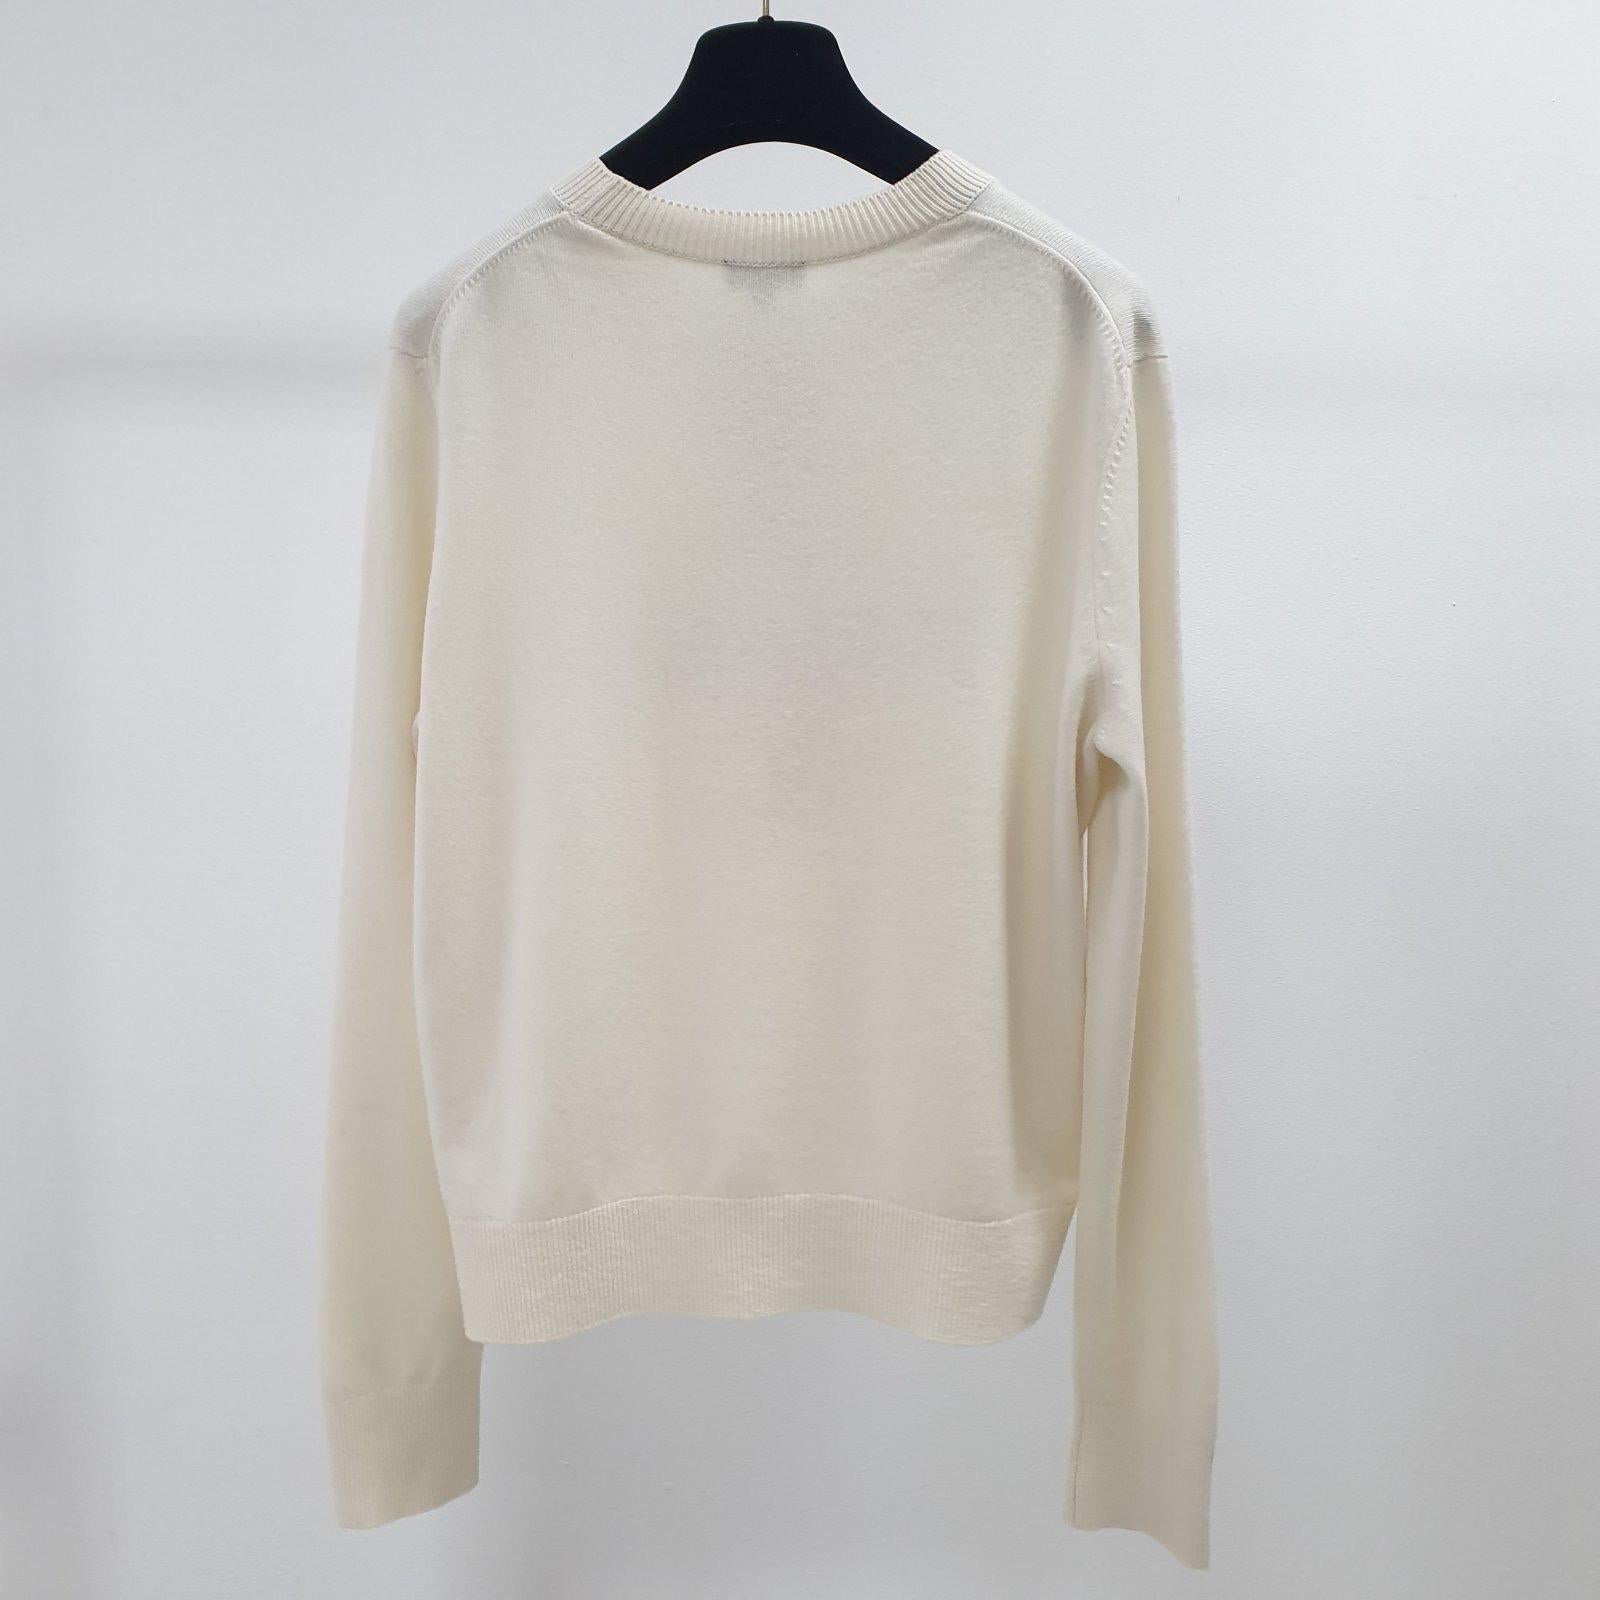 2019 Chanel La Pausa 100% Cashmere sweater, has good stretch. 
Size 40  
Excellent condition
Hanger is not included